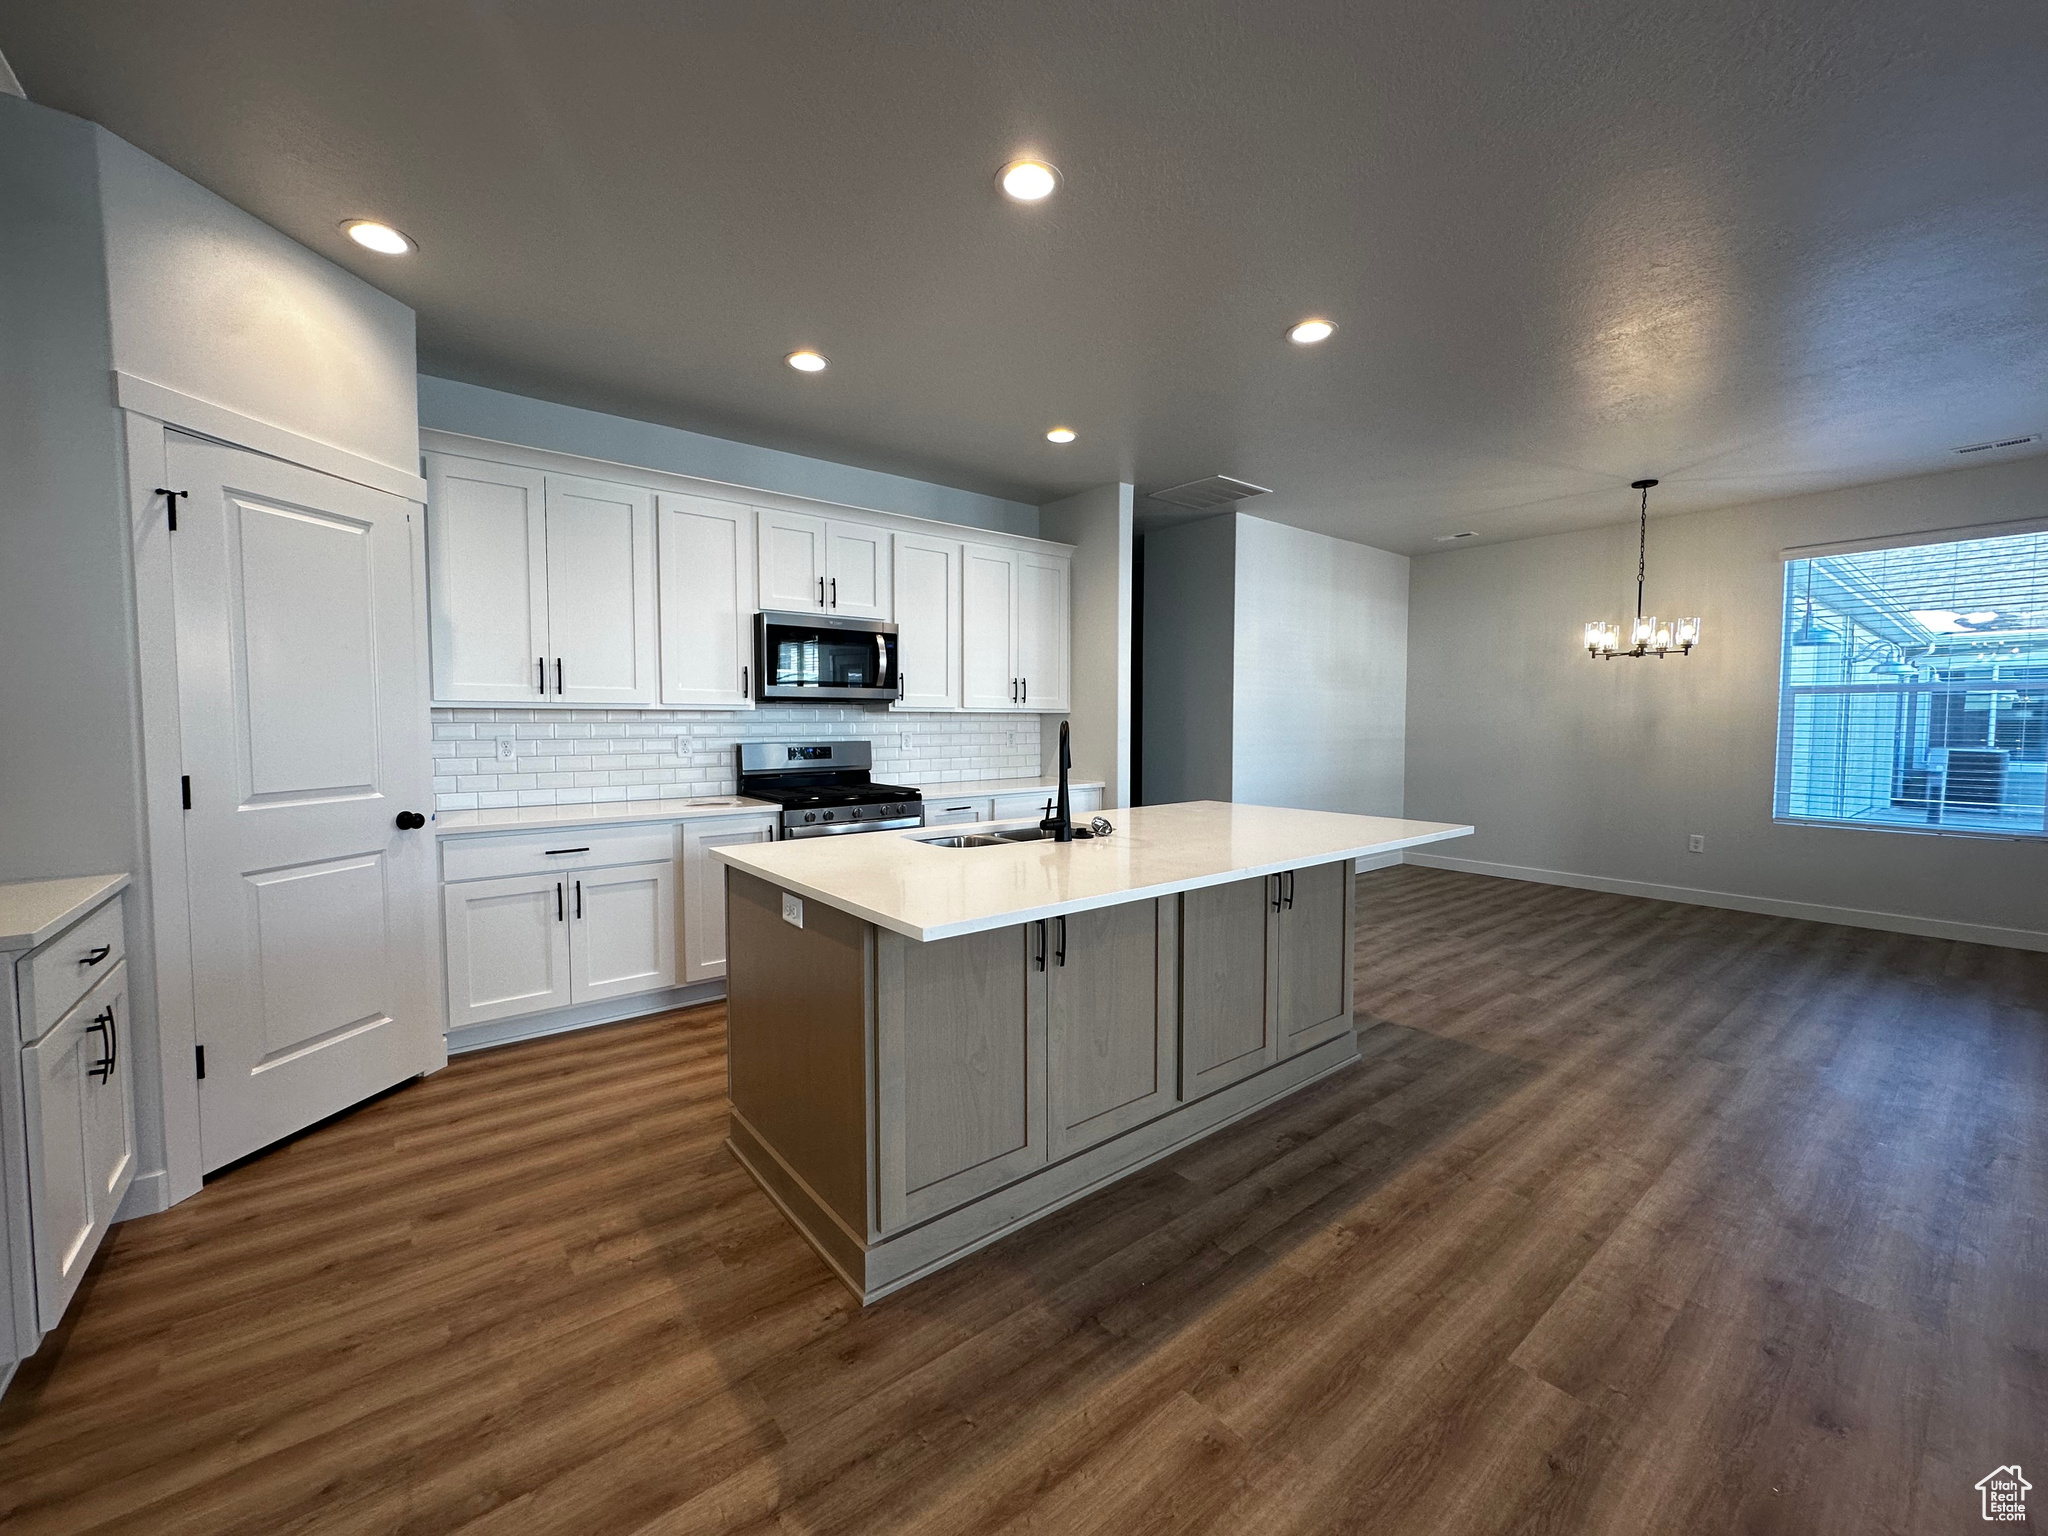 Kitchen with stainless steel appliances, white cabinets, an island with sink, and dark hardwood / wood-style flooring